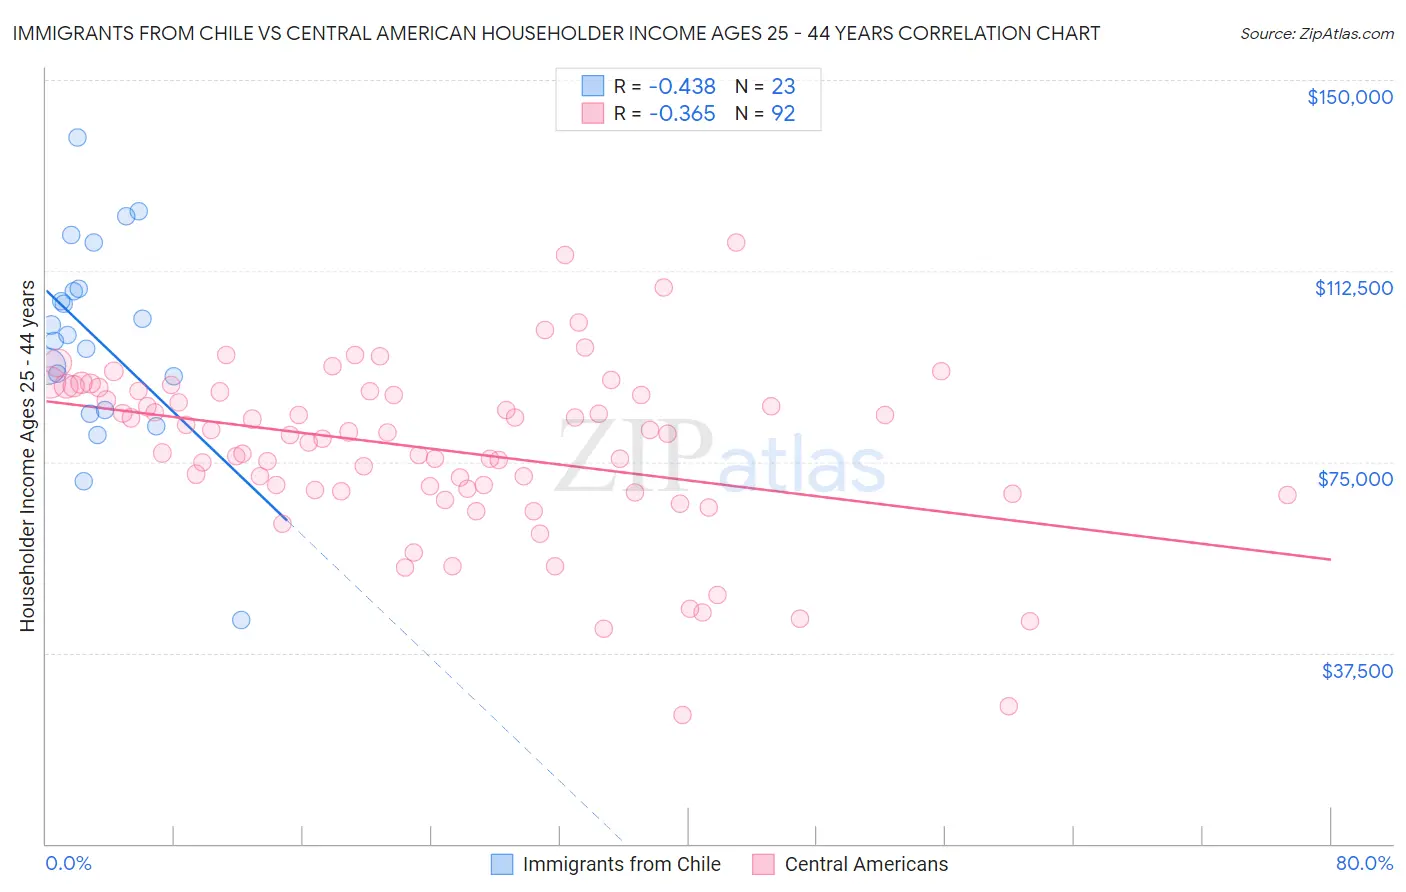 Immigrants from Chile vs Central American Householder Income Ages 25 - 44 years